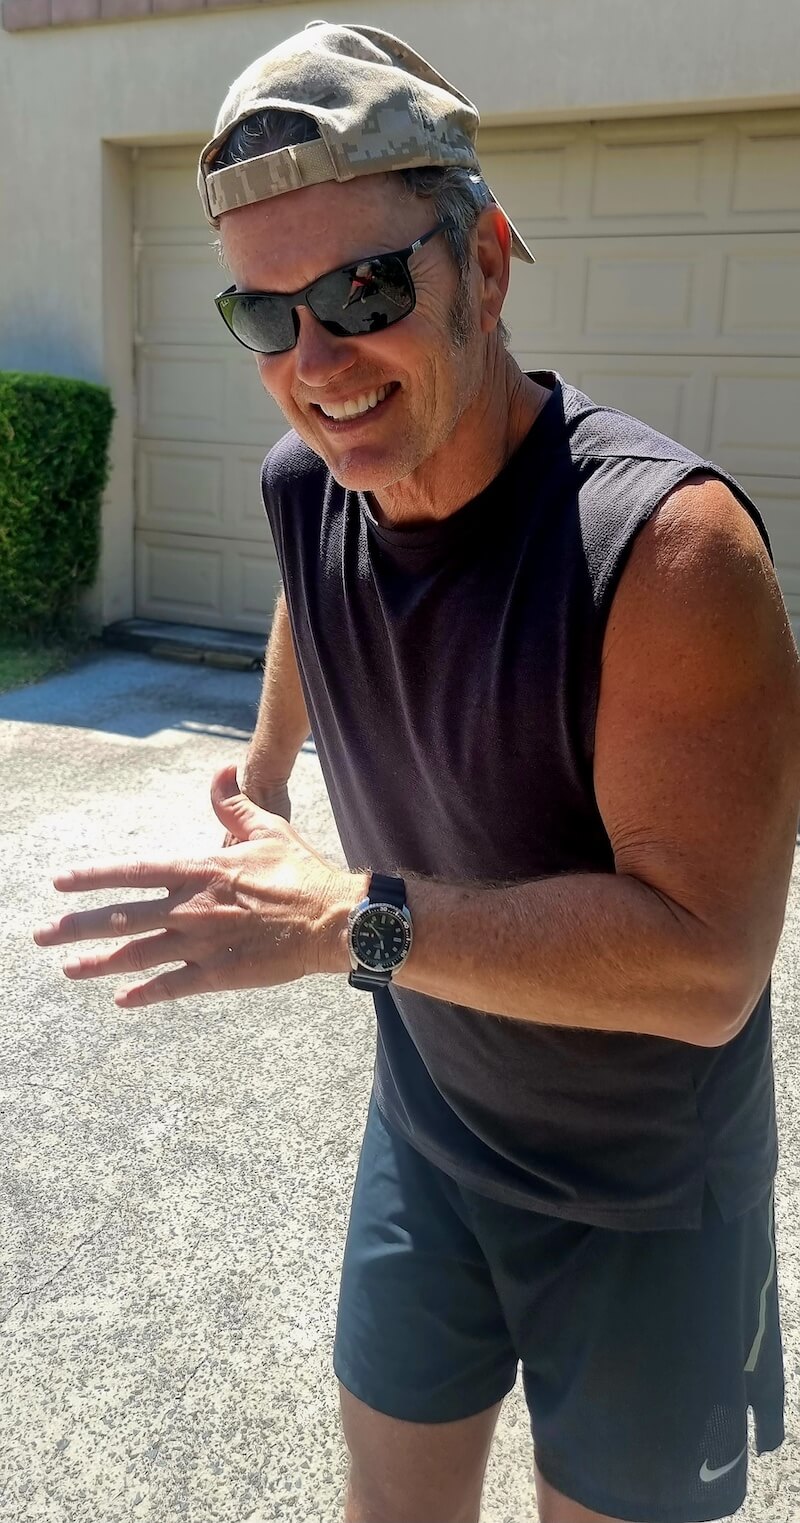 Craig Mclachlan having fun working out. Fitness is a part of his daily life.